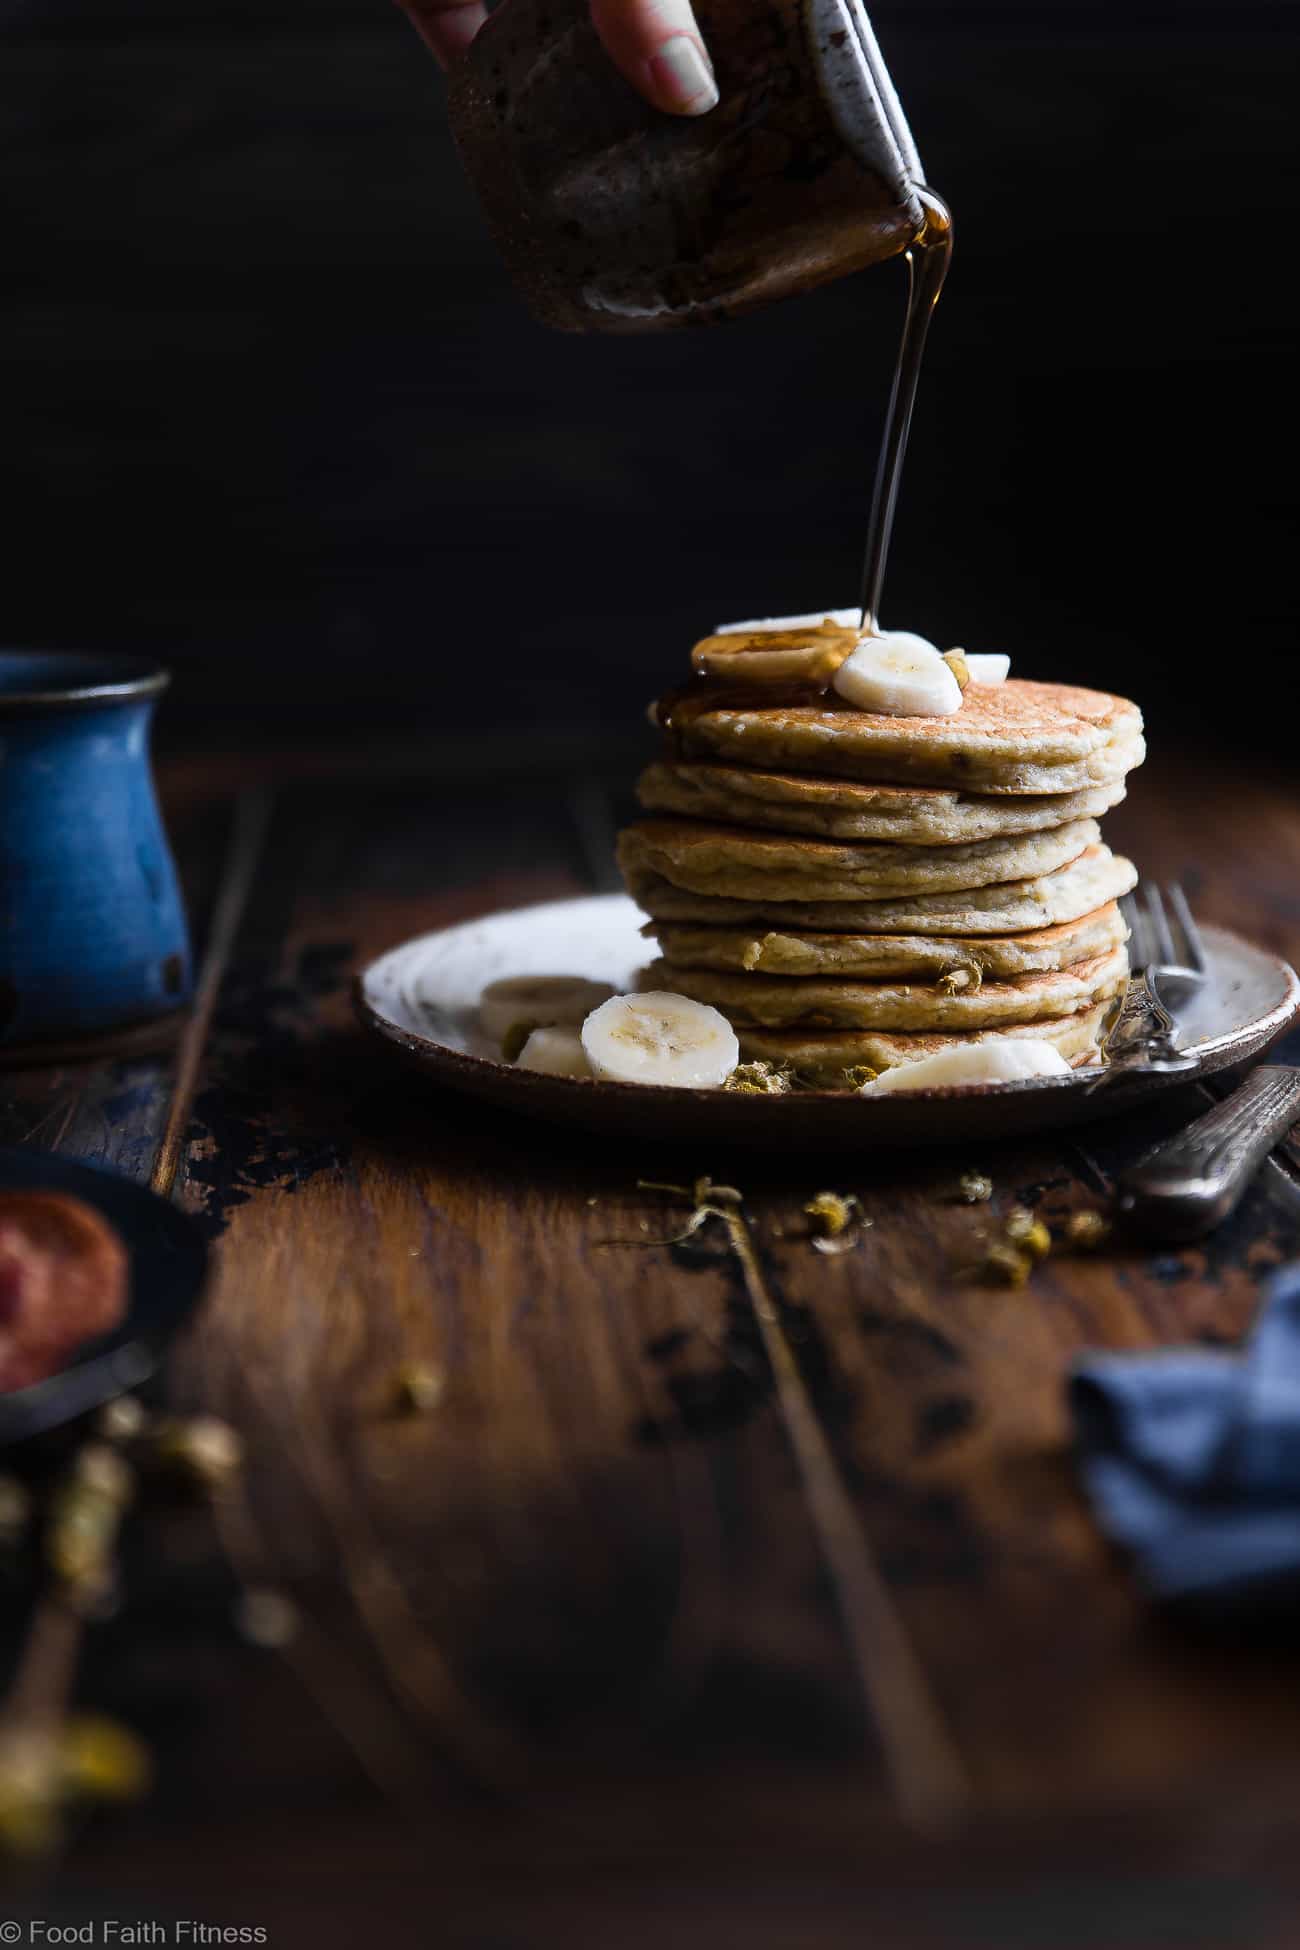 Easy Paleo Banana Pancakes with Coconut Flour - These quick and easy banana paleo pancakes are naturally sweetened, gluten, grain and dairy free and SO light and fluffy! The perfect healthy start to your day or weekend breakfast! | Foodfaithfitness.com | @FoodFaithFit